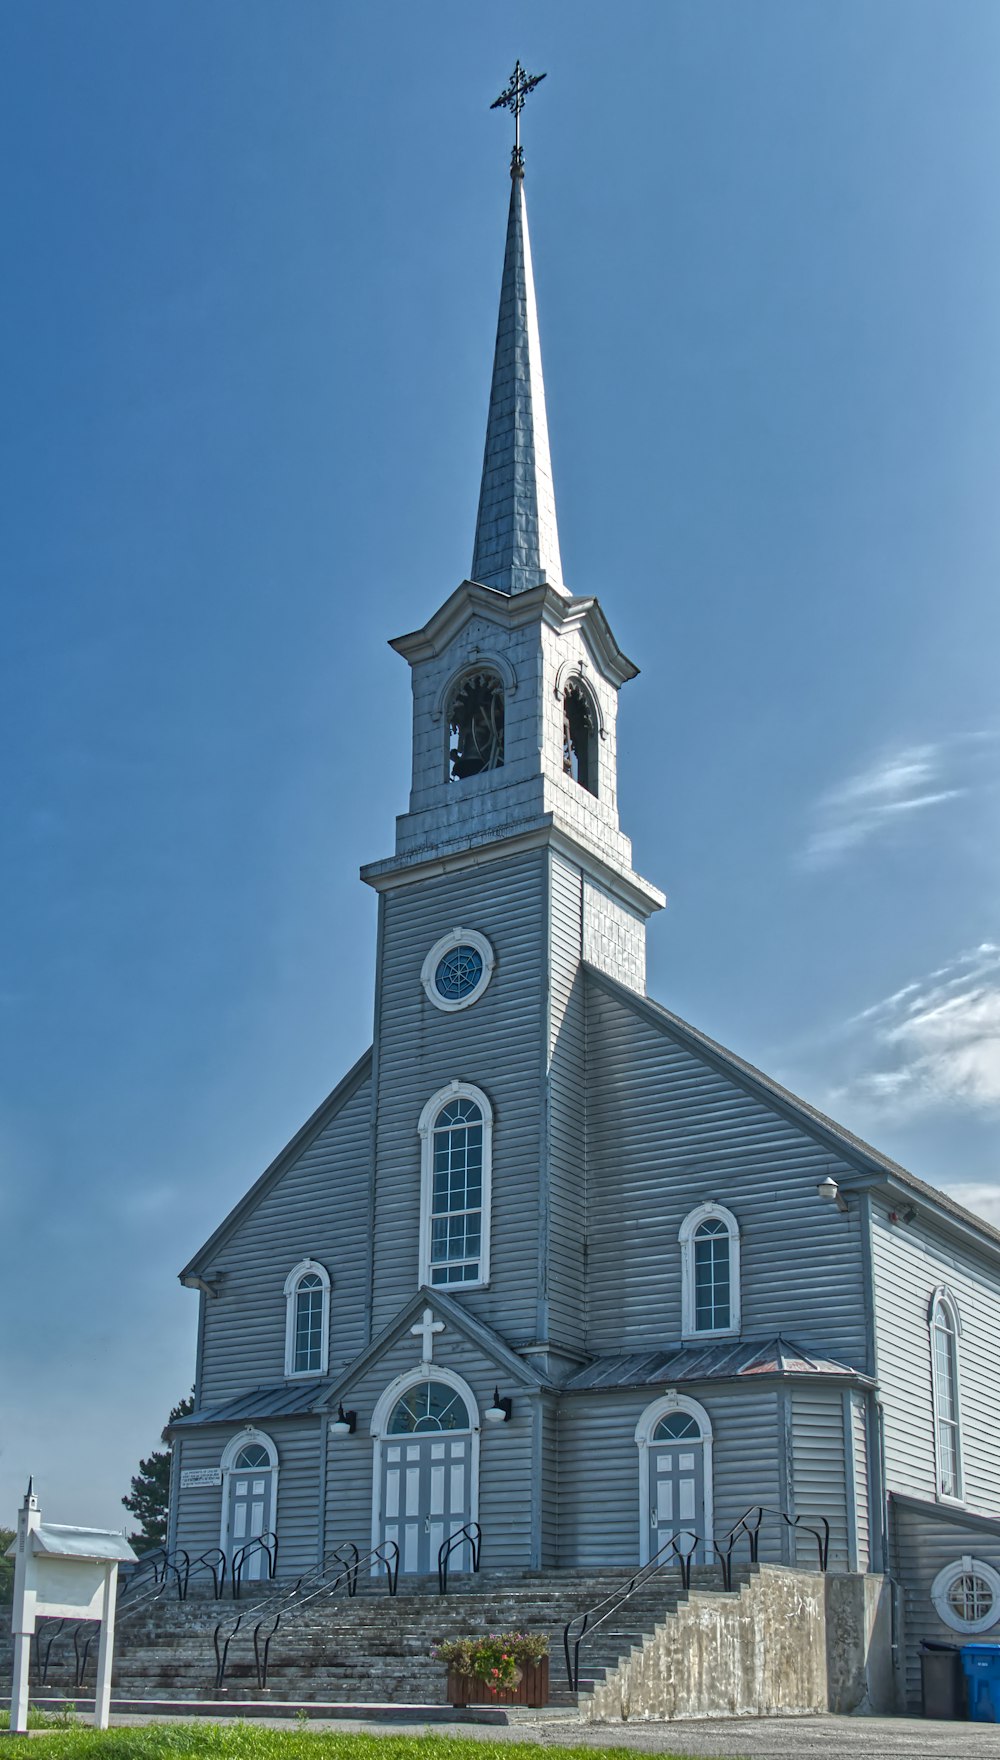 a church with a steeple and a clock tower